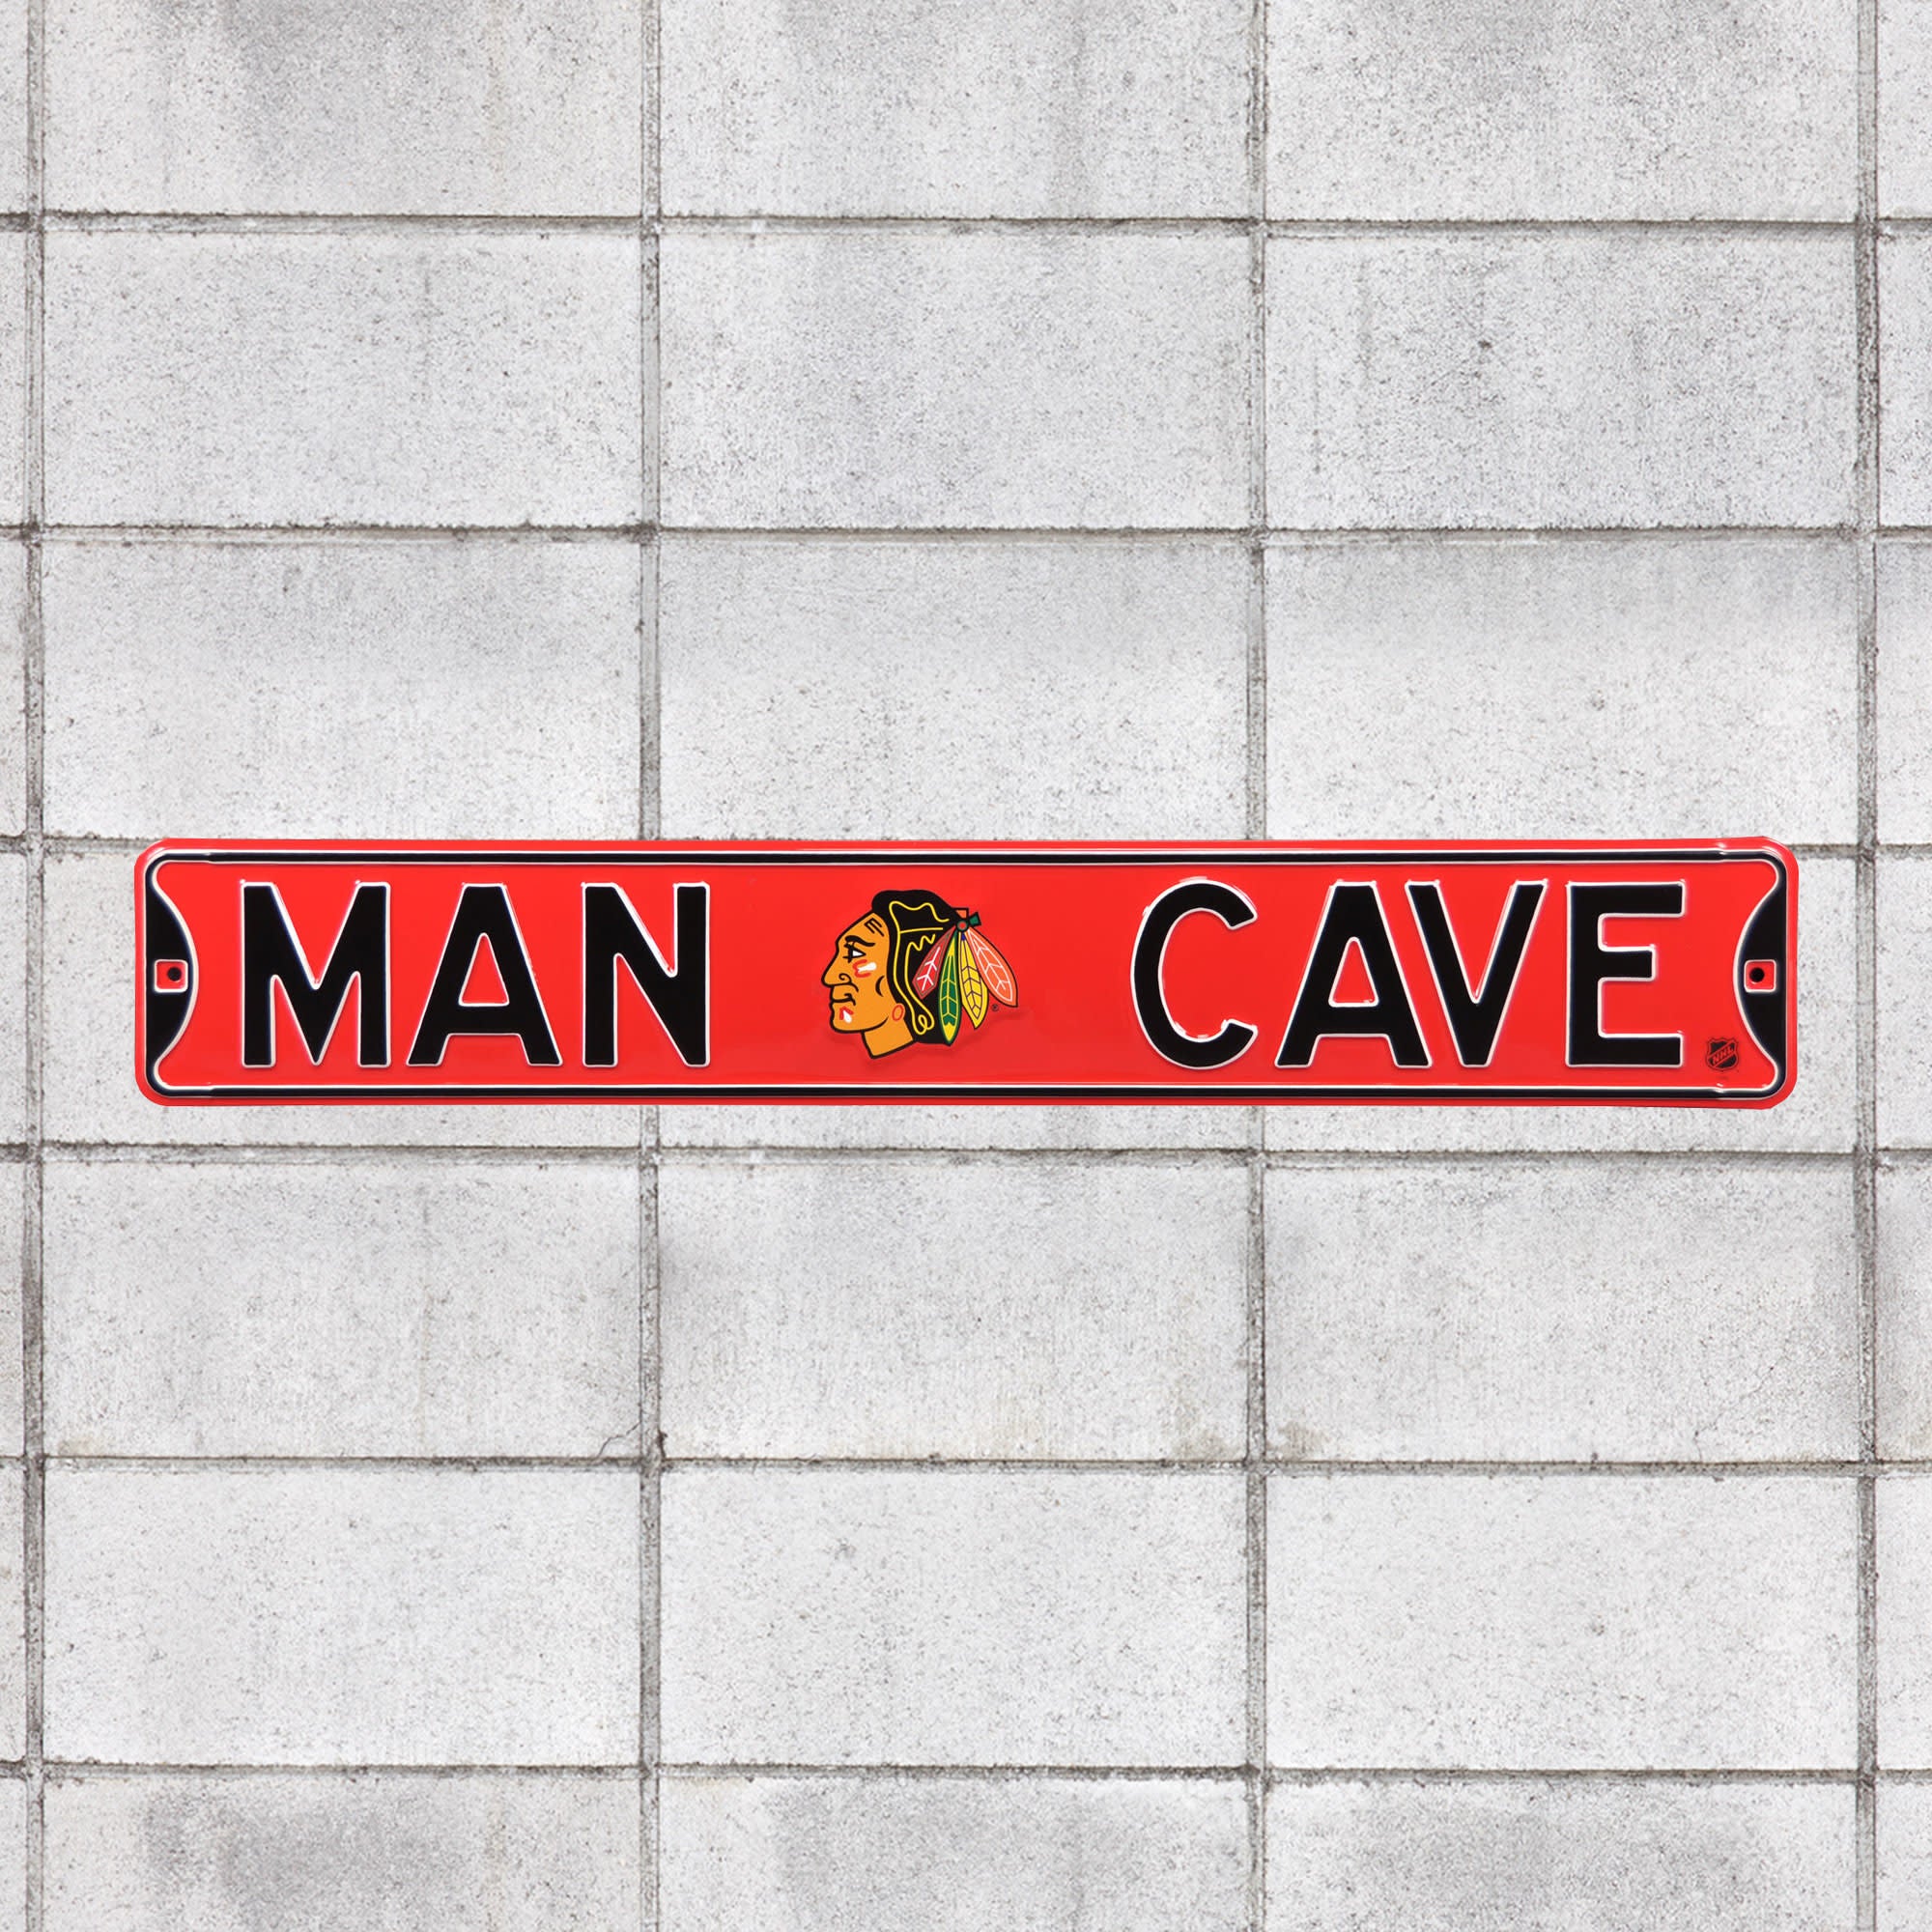 Chicago Blackhawks: Man Cave - Officially Licensed NHL Metal Street Sign 36.0"W x 6.0"H by Fathead | 100% Steel